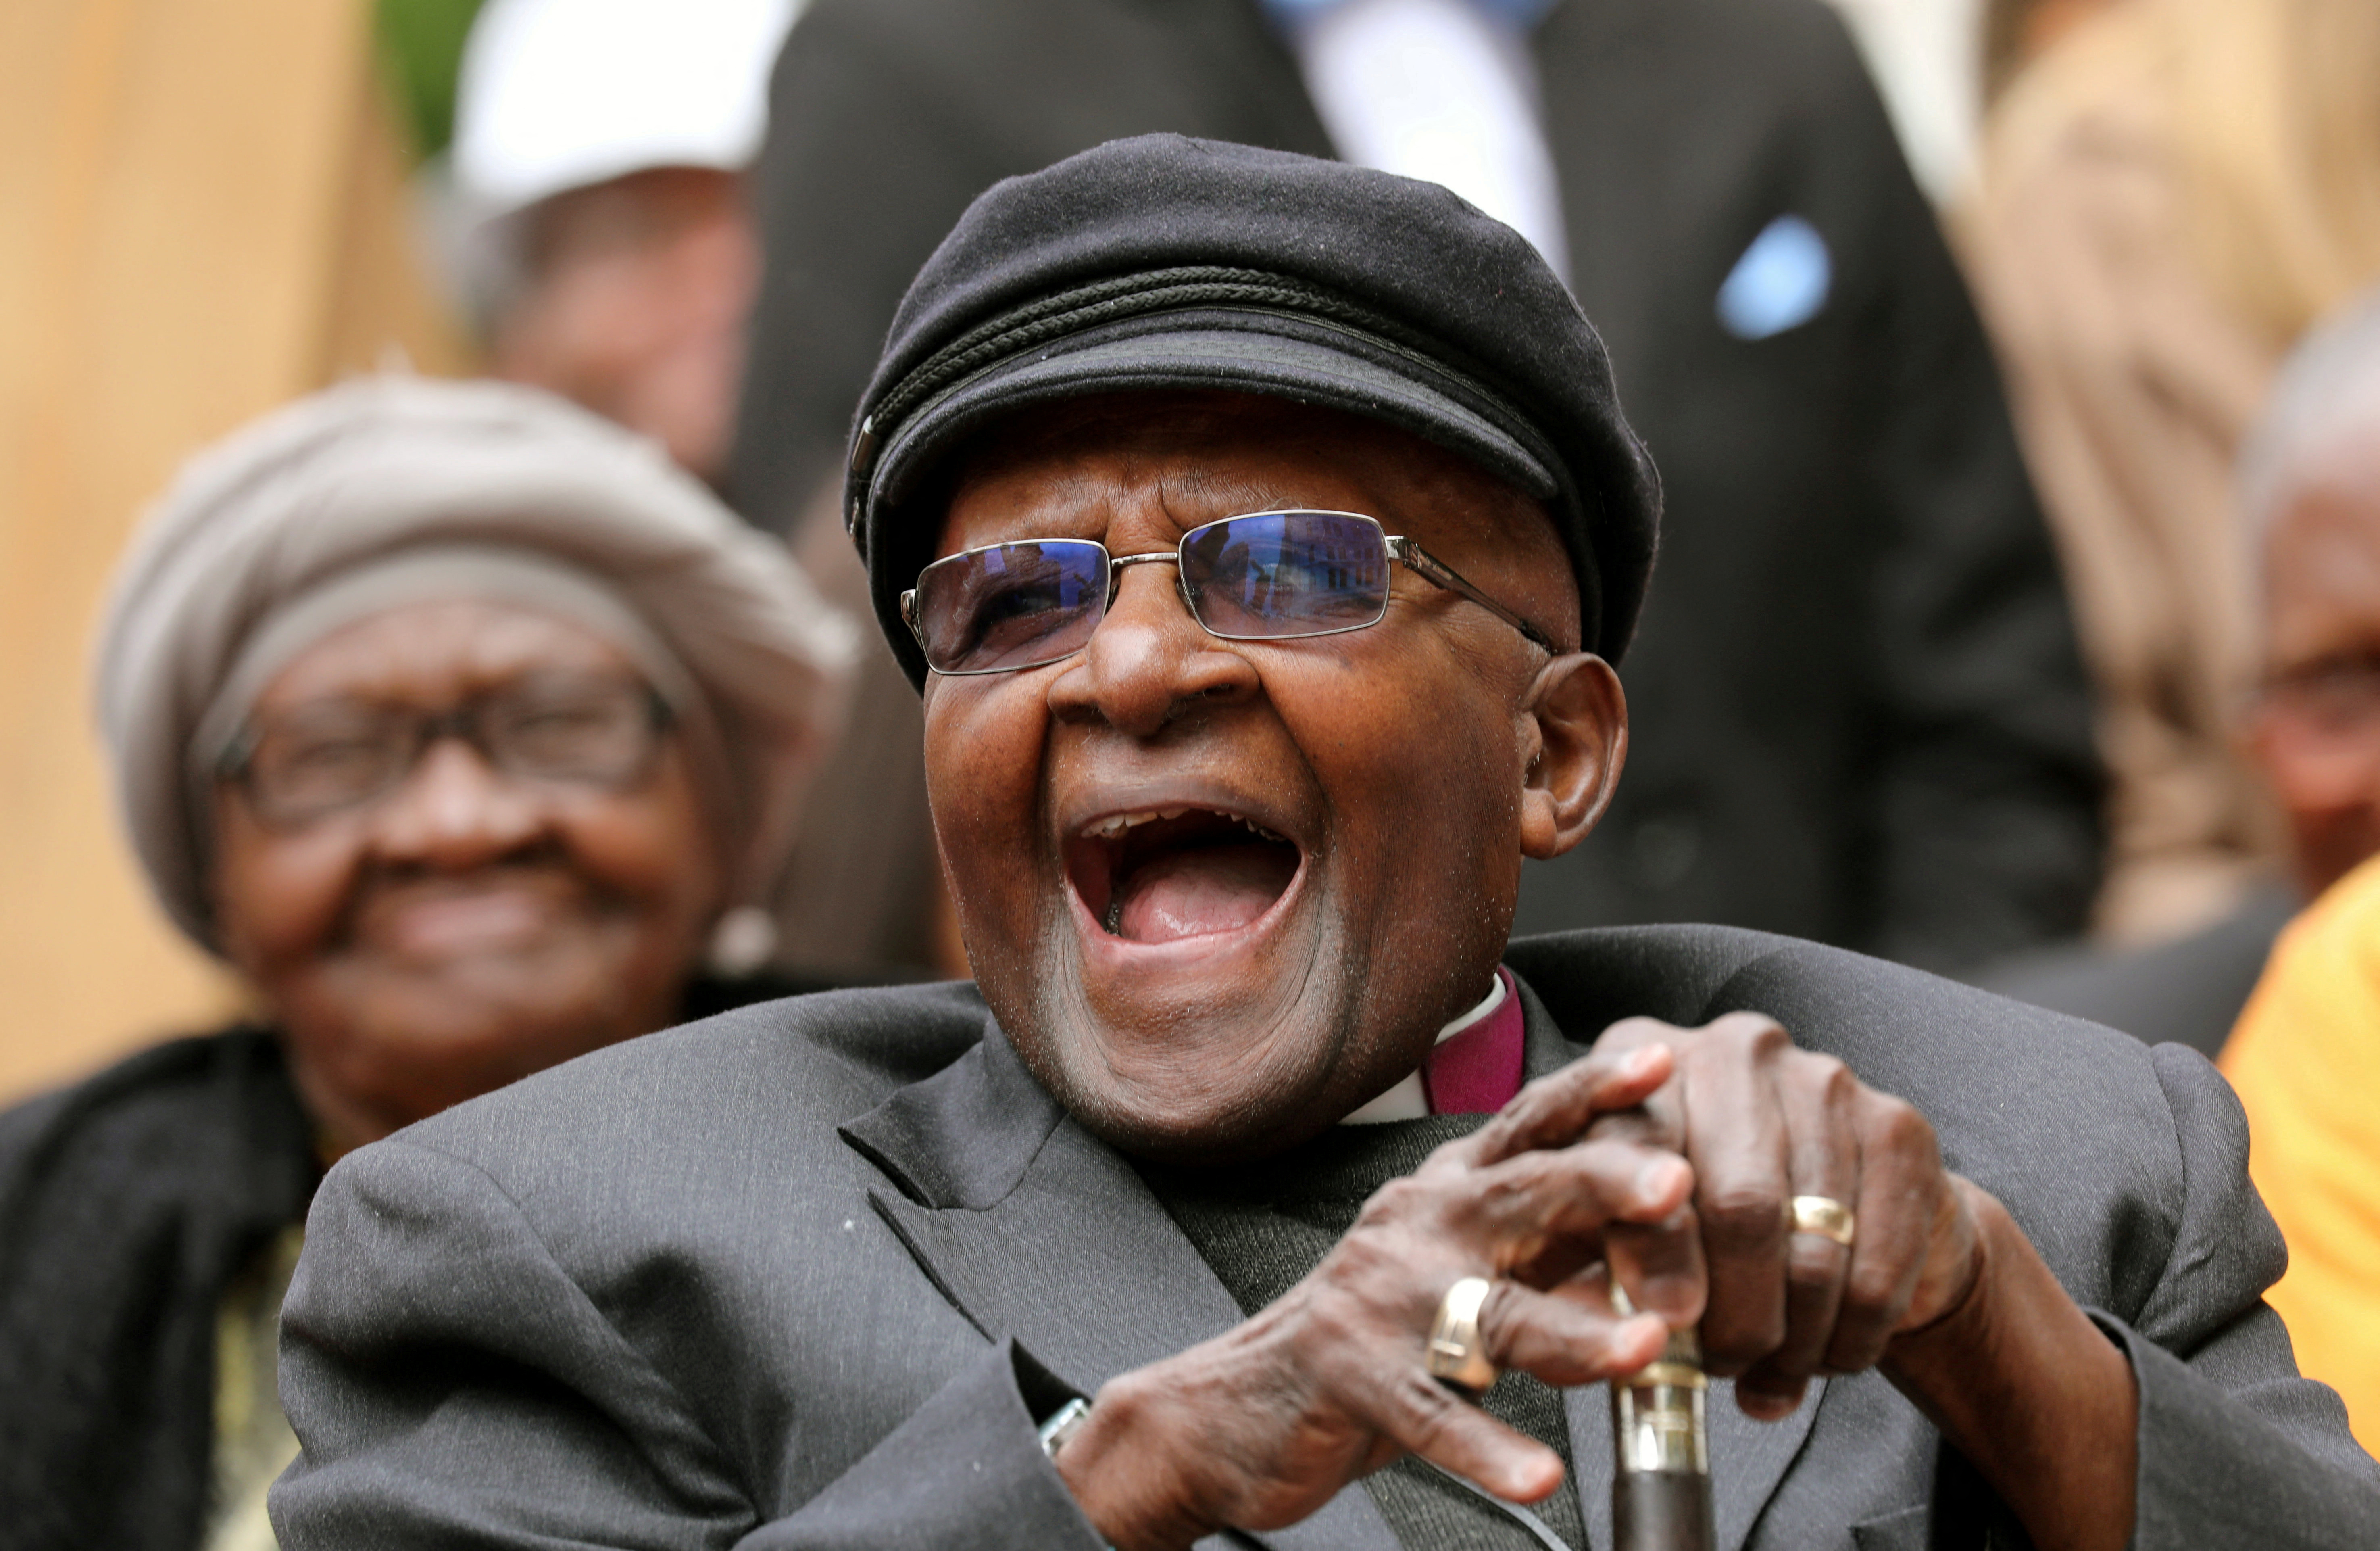 Archbishop Desmond Tutu laughs as crowds gather to celebrate his birthday by unveiling an arch in his honour outside St George's Cathedral in Cape Town, South Africa, October 7, 2017. REUTERS/Mike Hutchings    